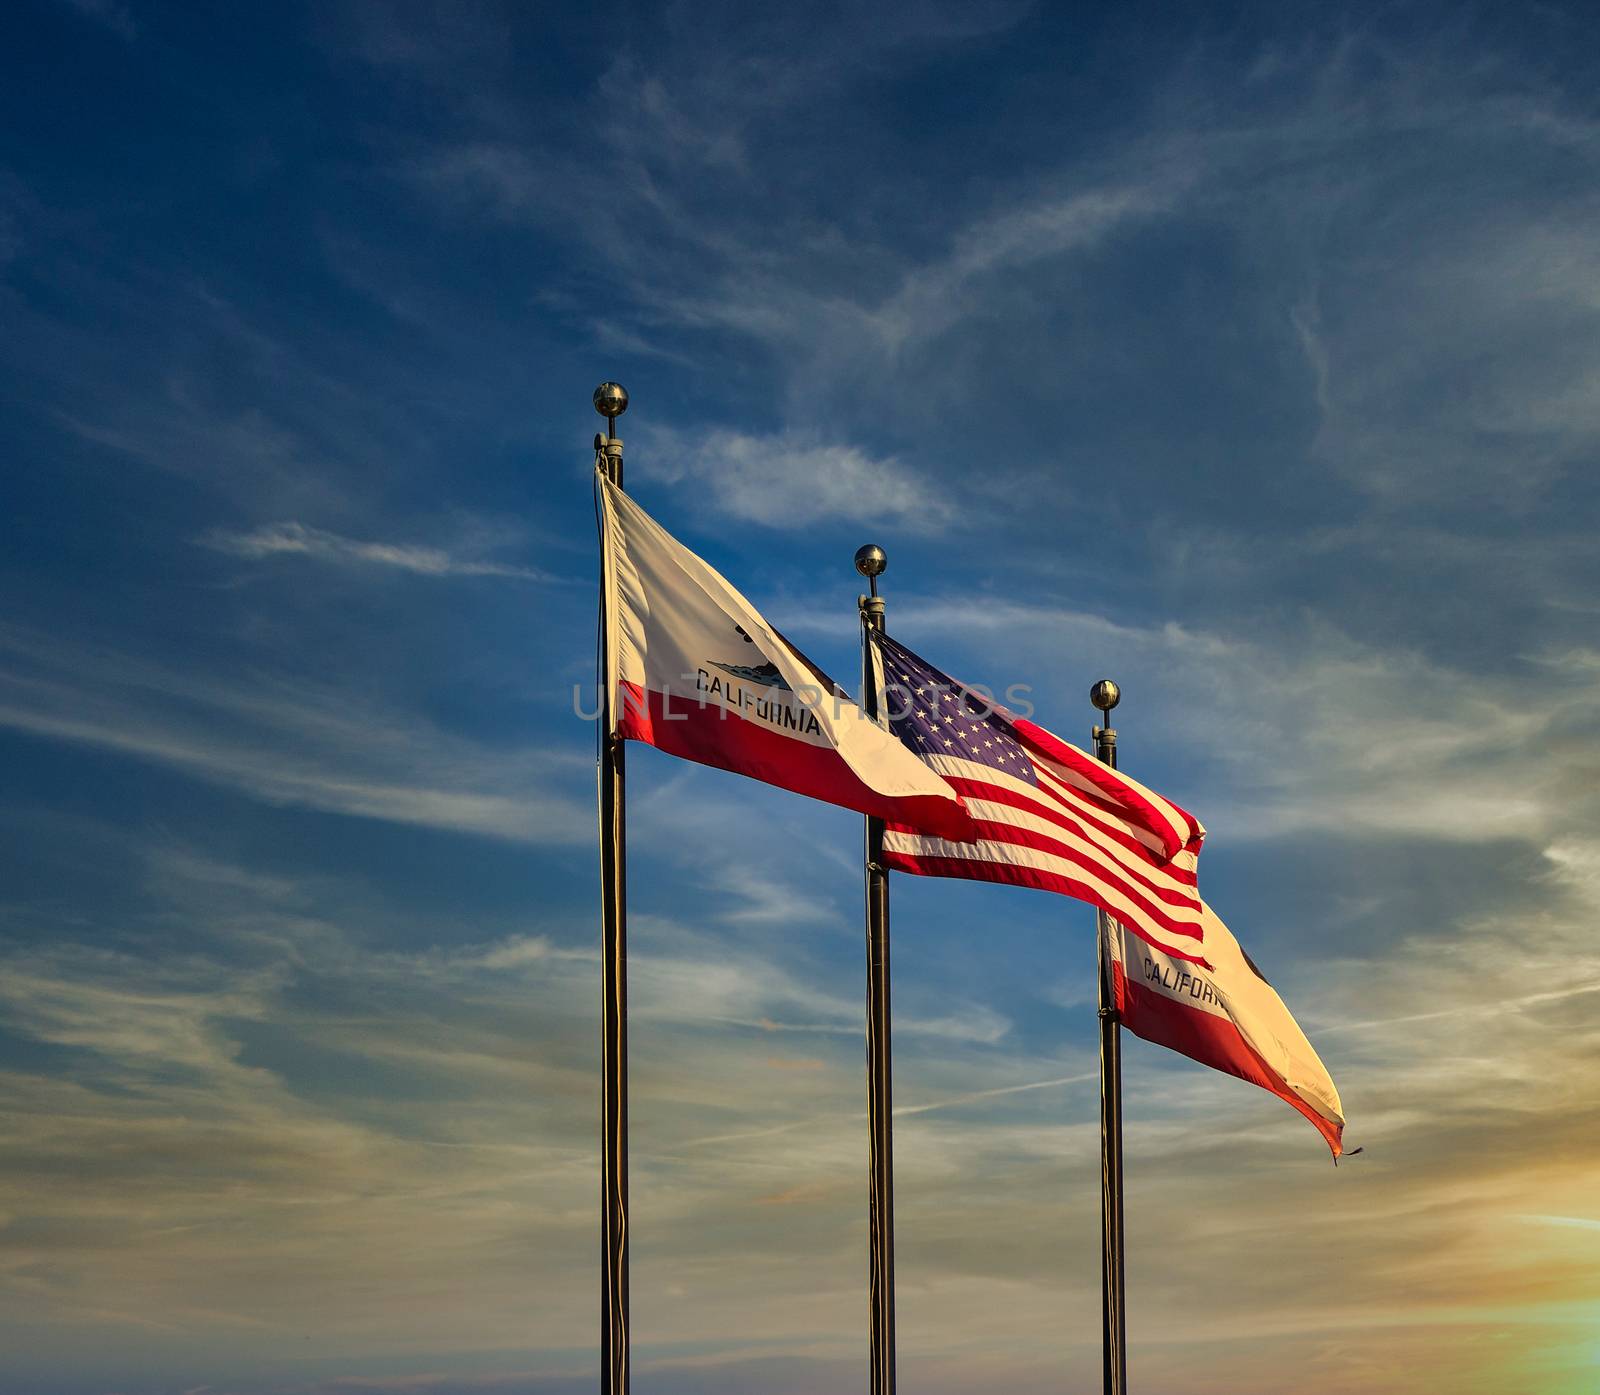 California and American Flags at Sunset by dbvirago